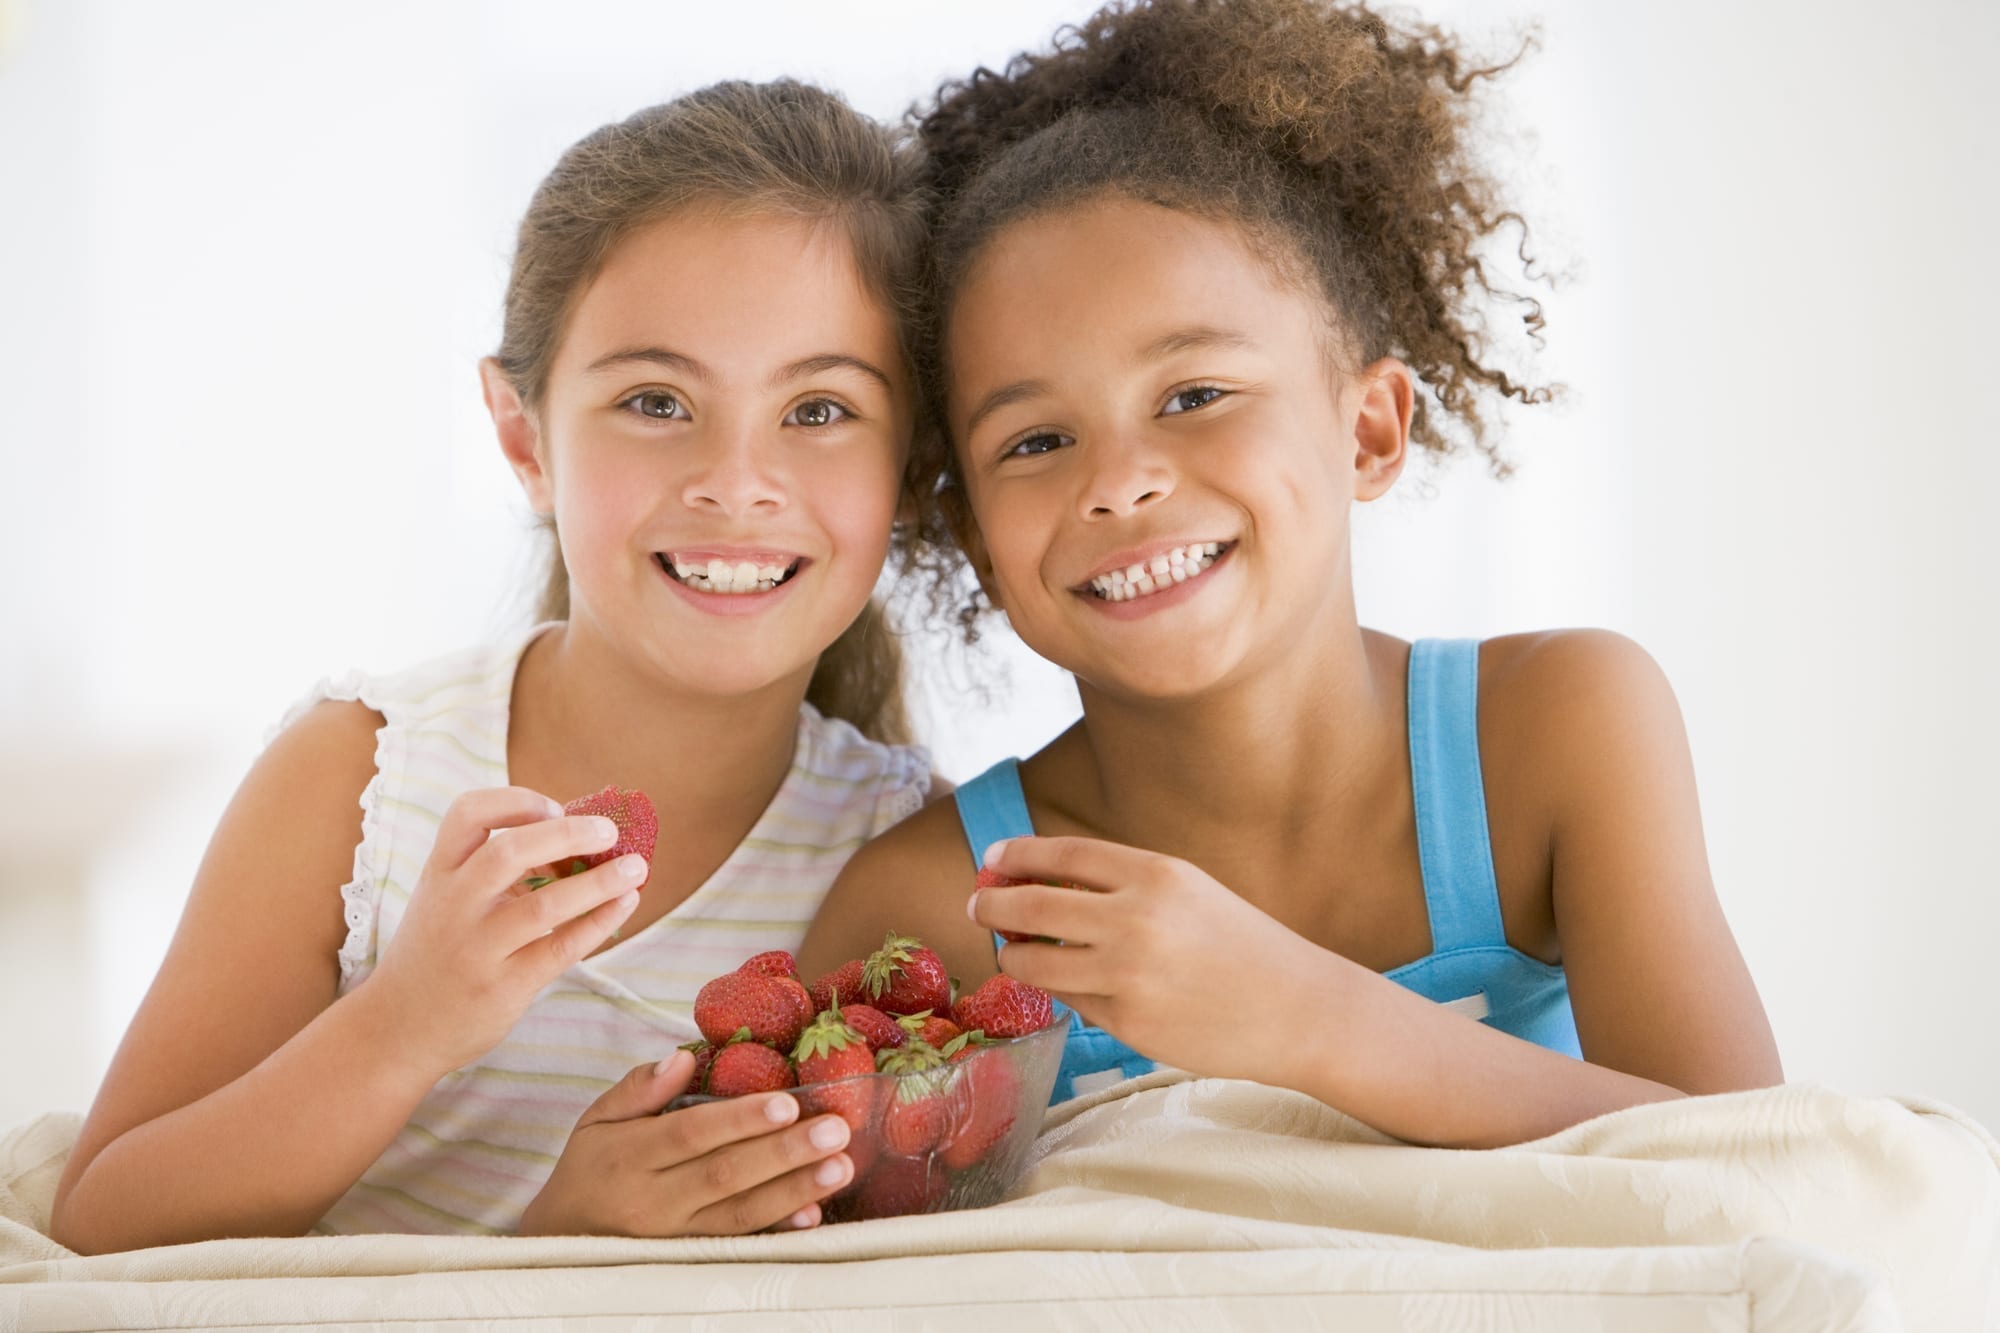 Kid-Friendly, Pediatric-Dentist-Approved, Healthy Snacks for Your Child